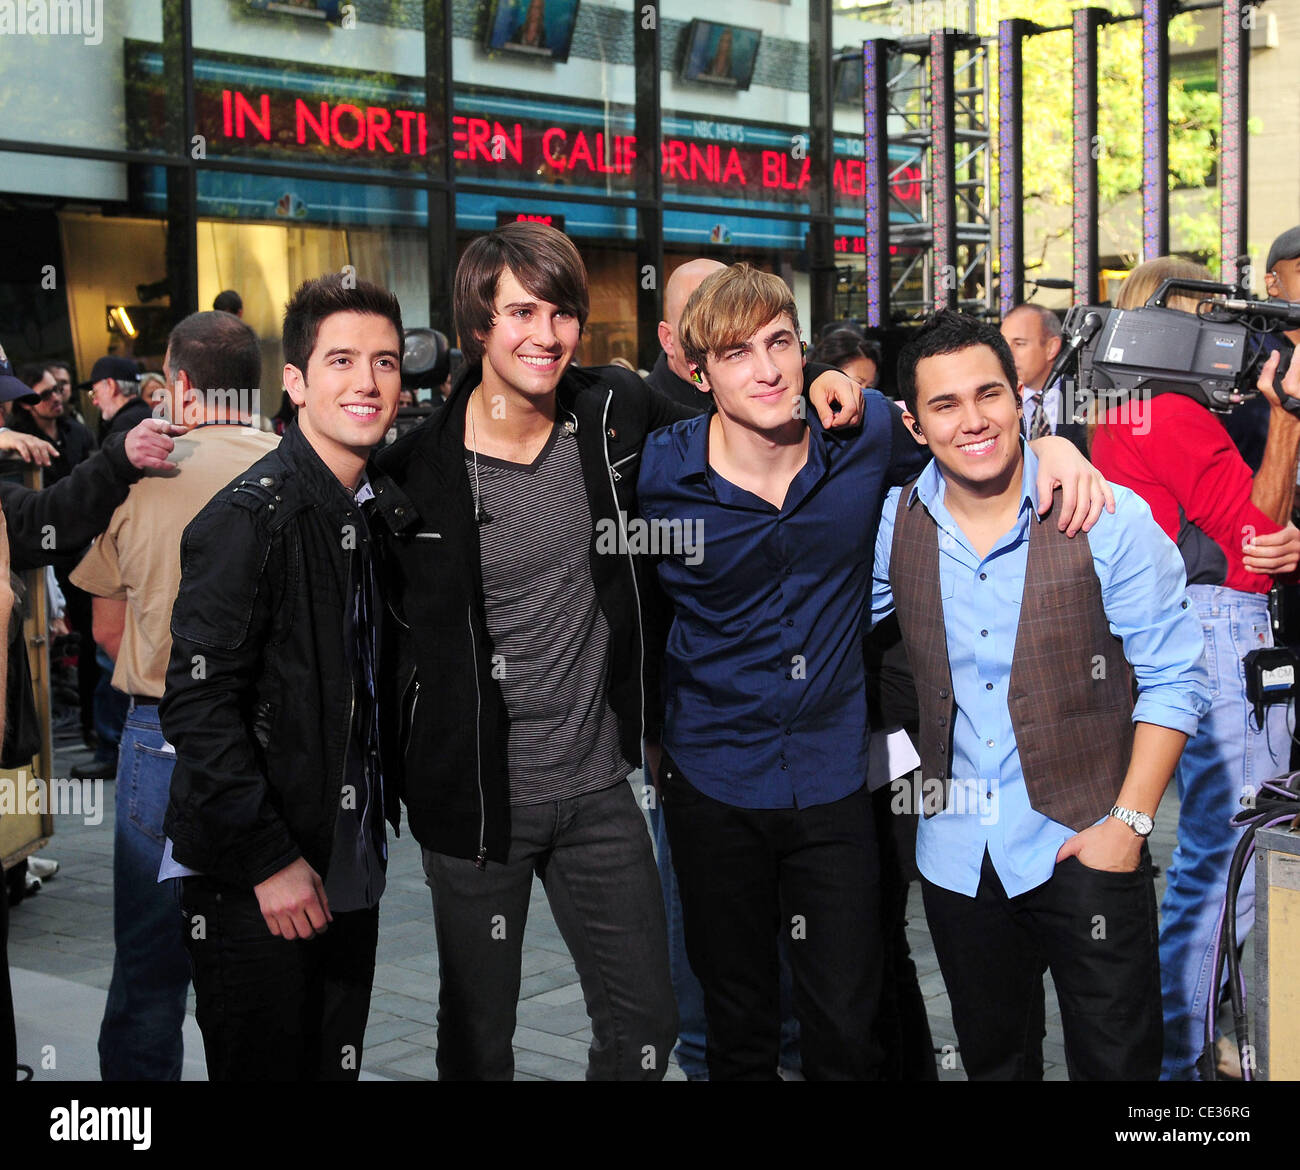 Big Time Rush  of Nickelodeon, performs on the TV show 'Today Show' at Rockefeller Center  New York City, USA - 11.10.10 Stock Photo